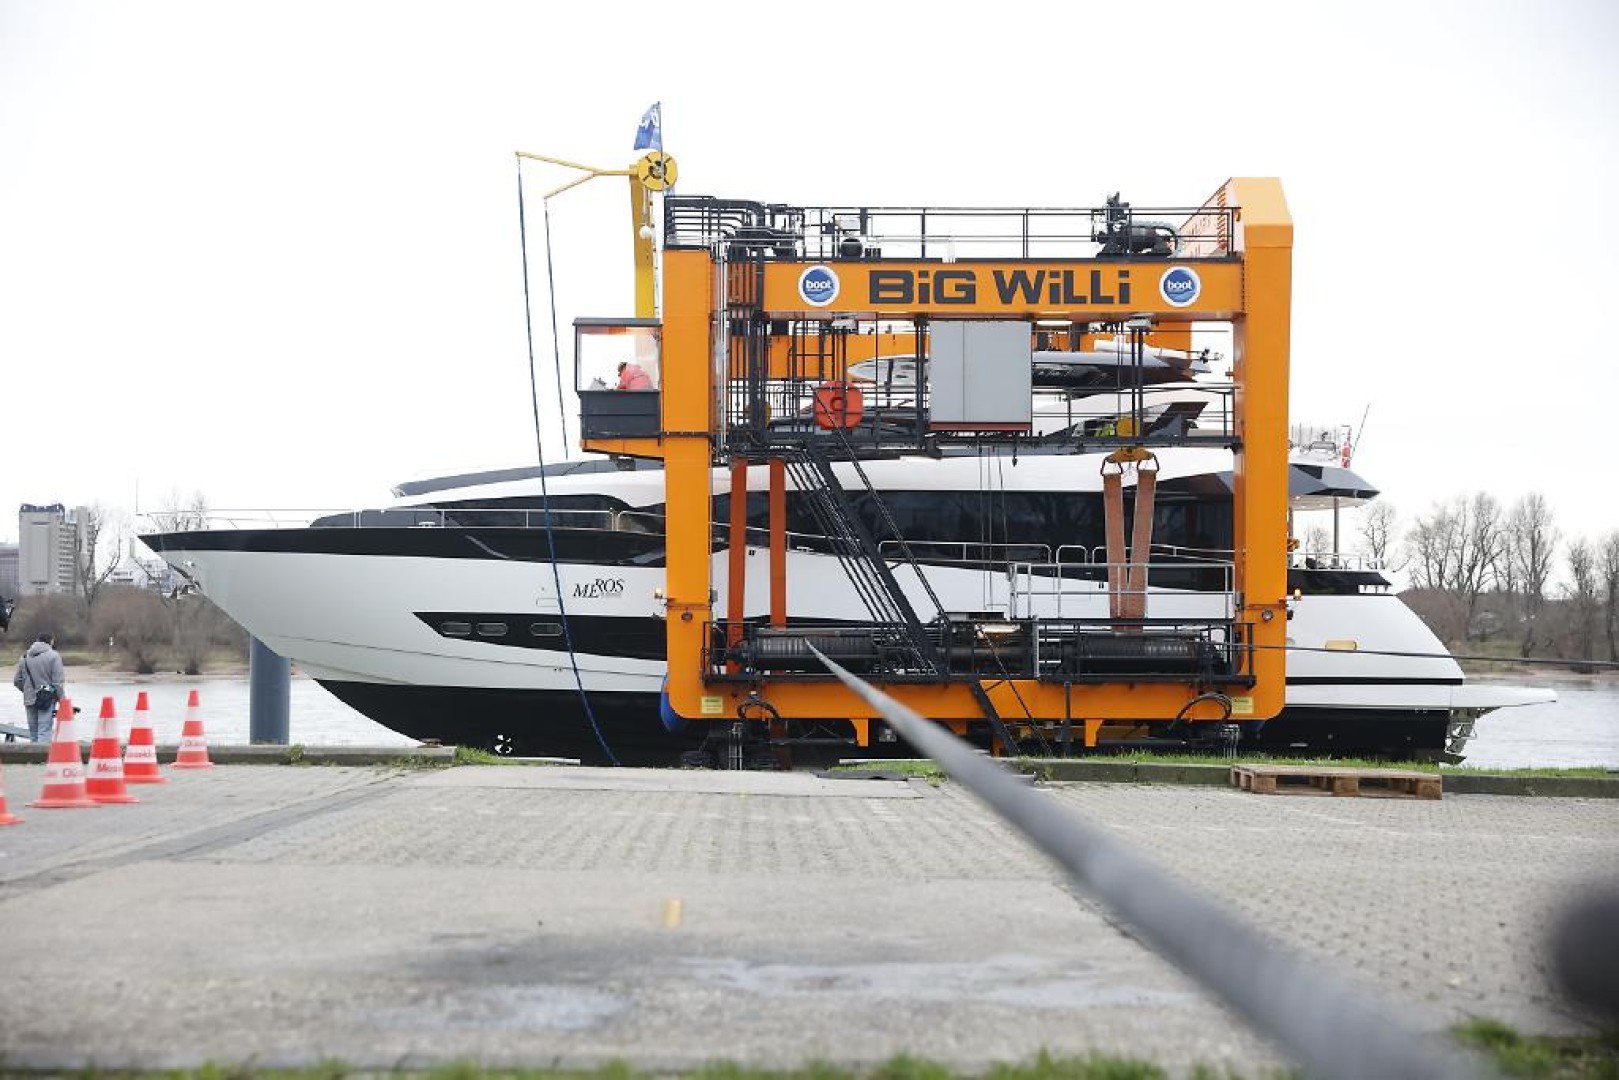 Ship Launch With Big Willi The Boat Lift 100 Tonne Yacht, 53% OFF